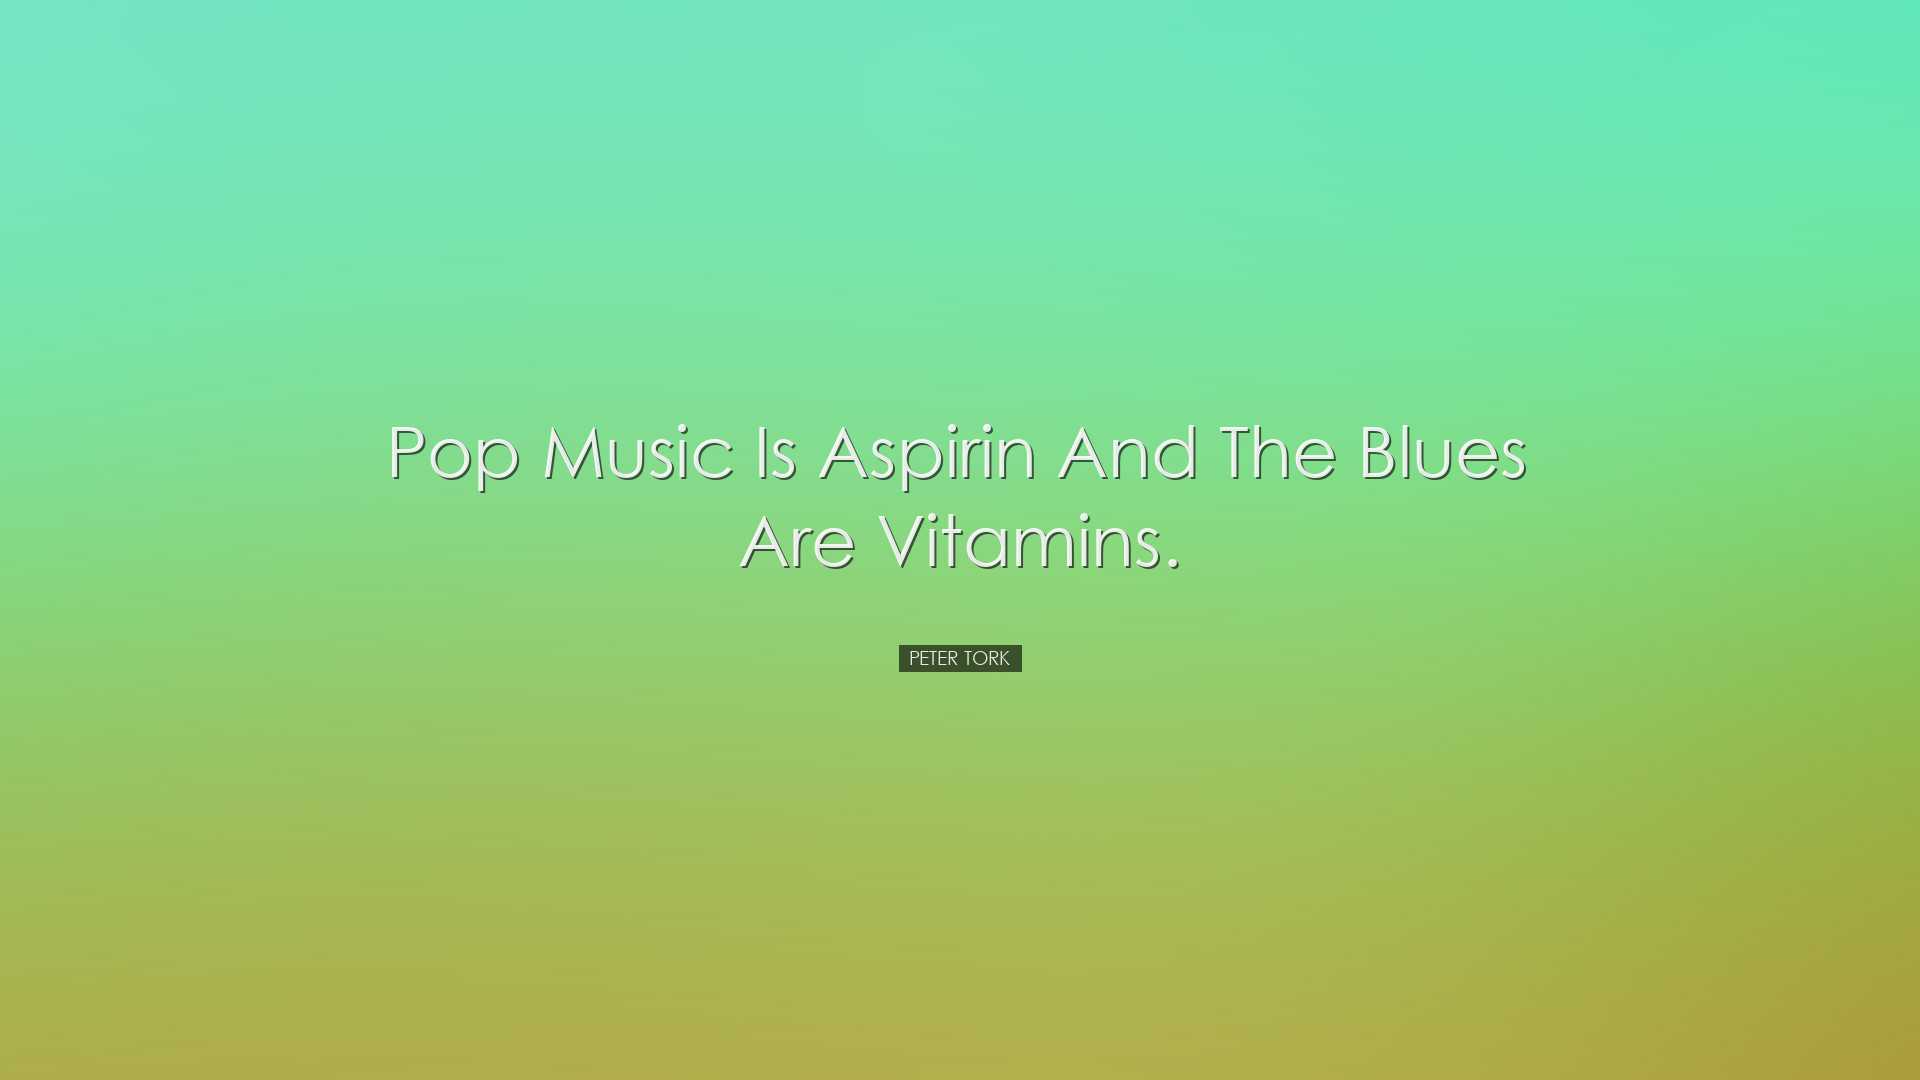 Pop music is aspirin and the blues are vitamins. - Peter Tork